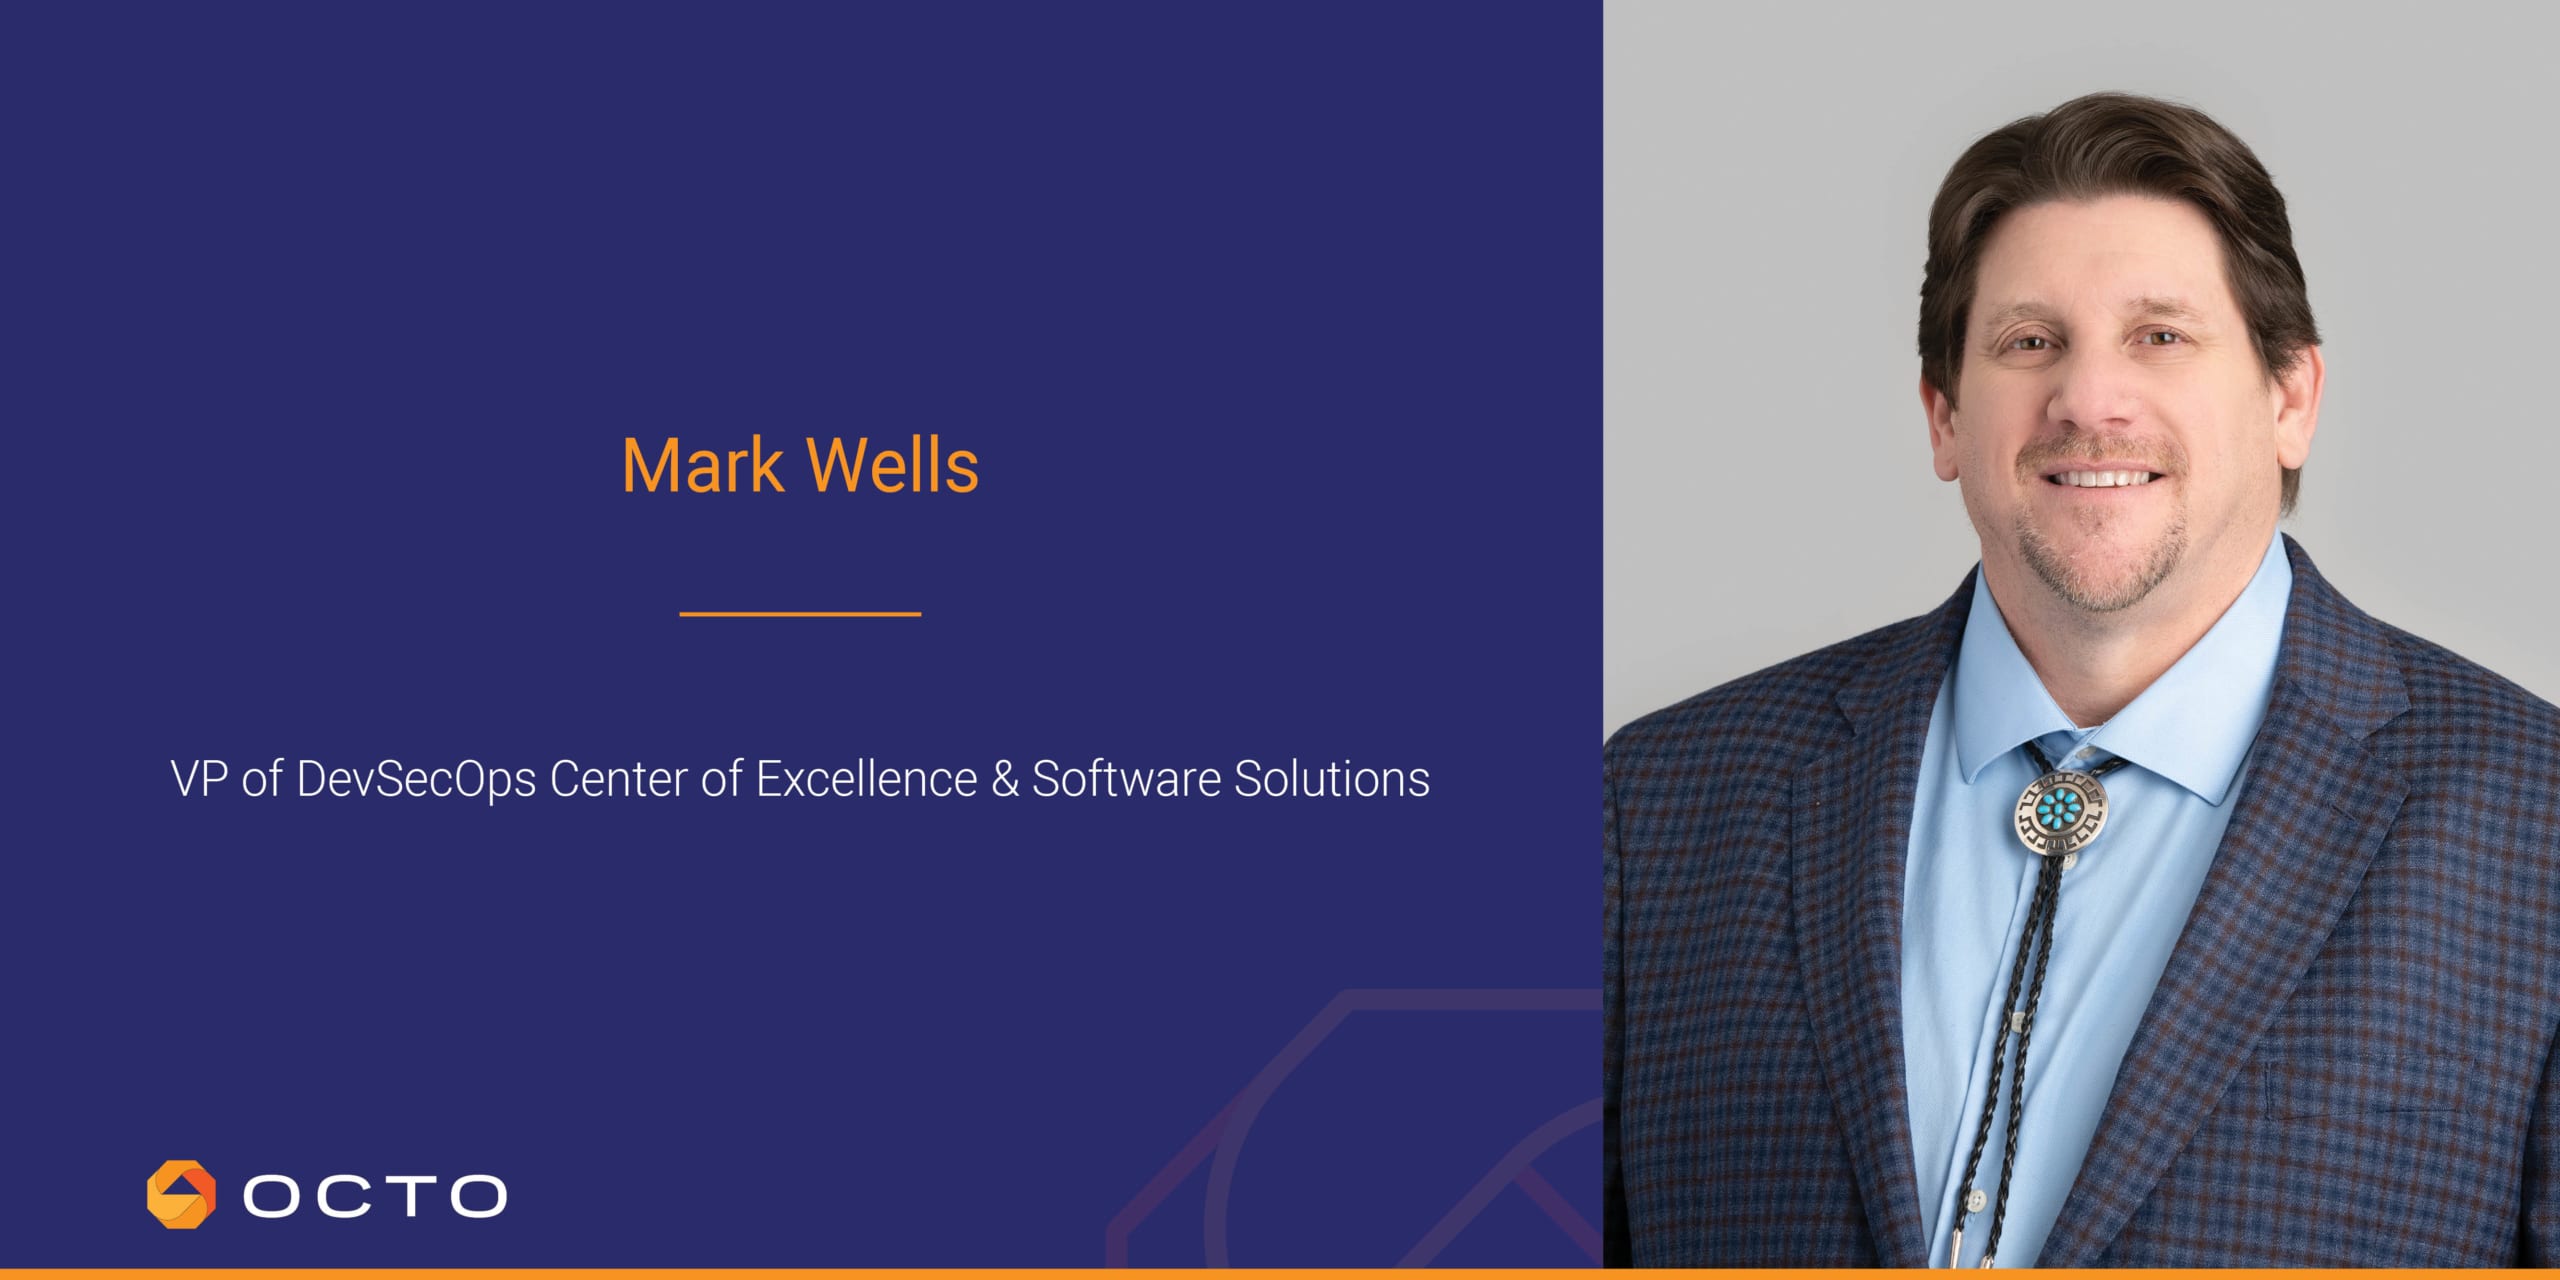 Mark Wells, VP of DevSecOps Center of Excellence & Software Solutions